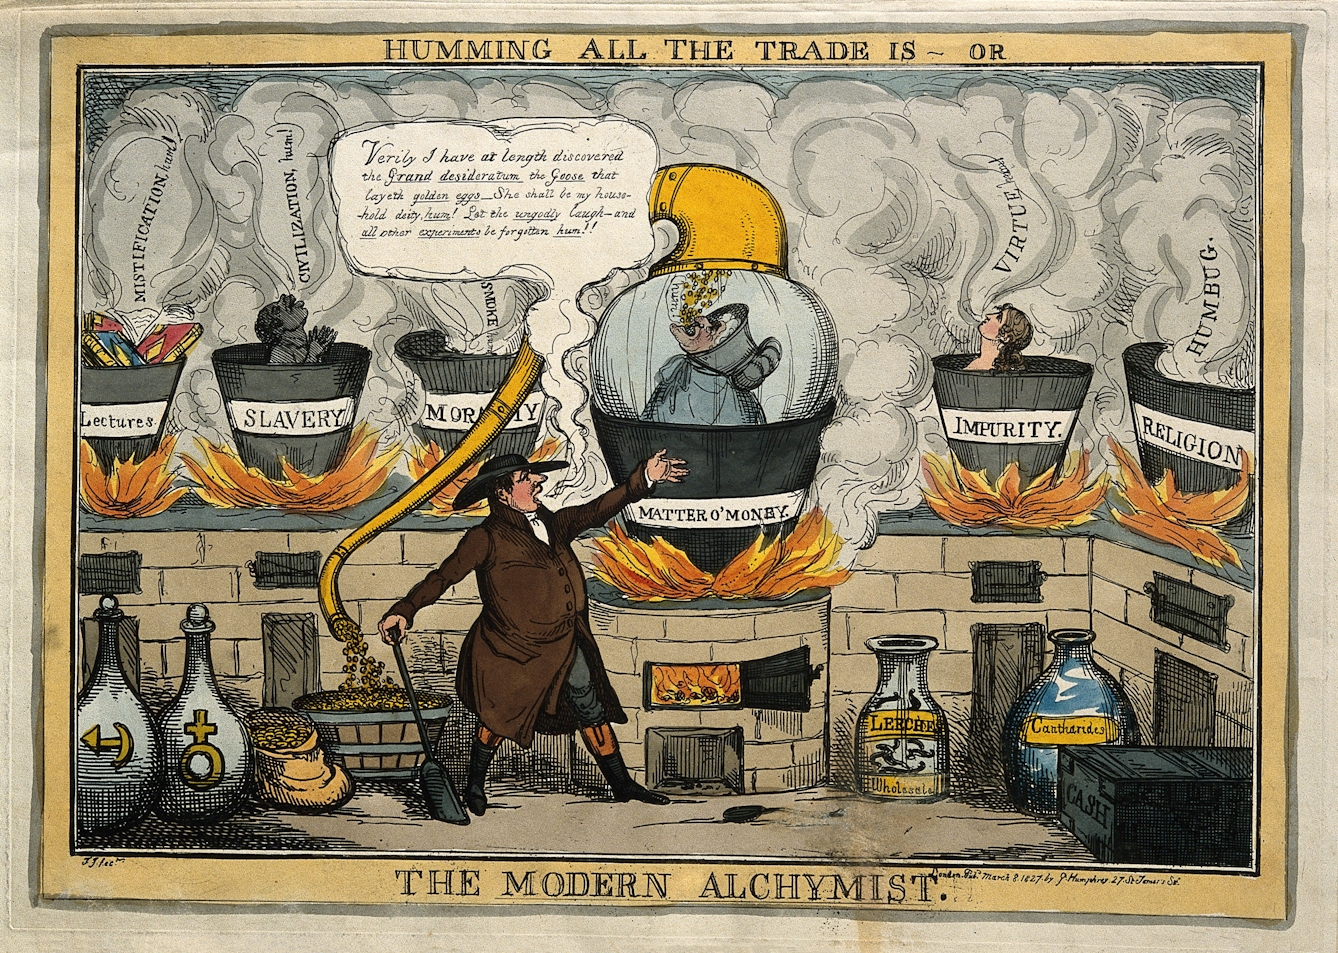 A man stands in front of a furnace labelled matter o'money, which contains an old woman in a bonnet being fed gold via a tube. The man proclaims "Verily I have at length discovered the Grand desideratum, the Goose that layeth golden eggs. She shall be my house-hold deity, hum! Let the ungodly laugh - and all other experiments be forgotten hum!!"